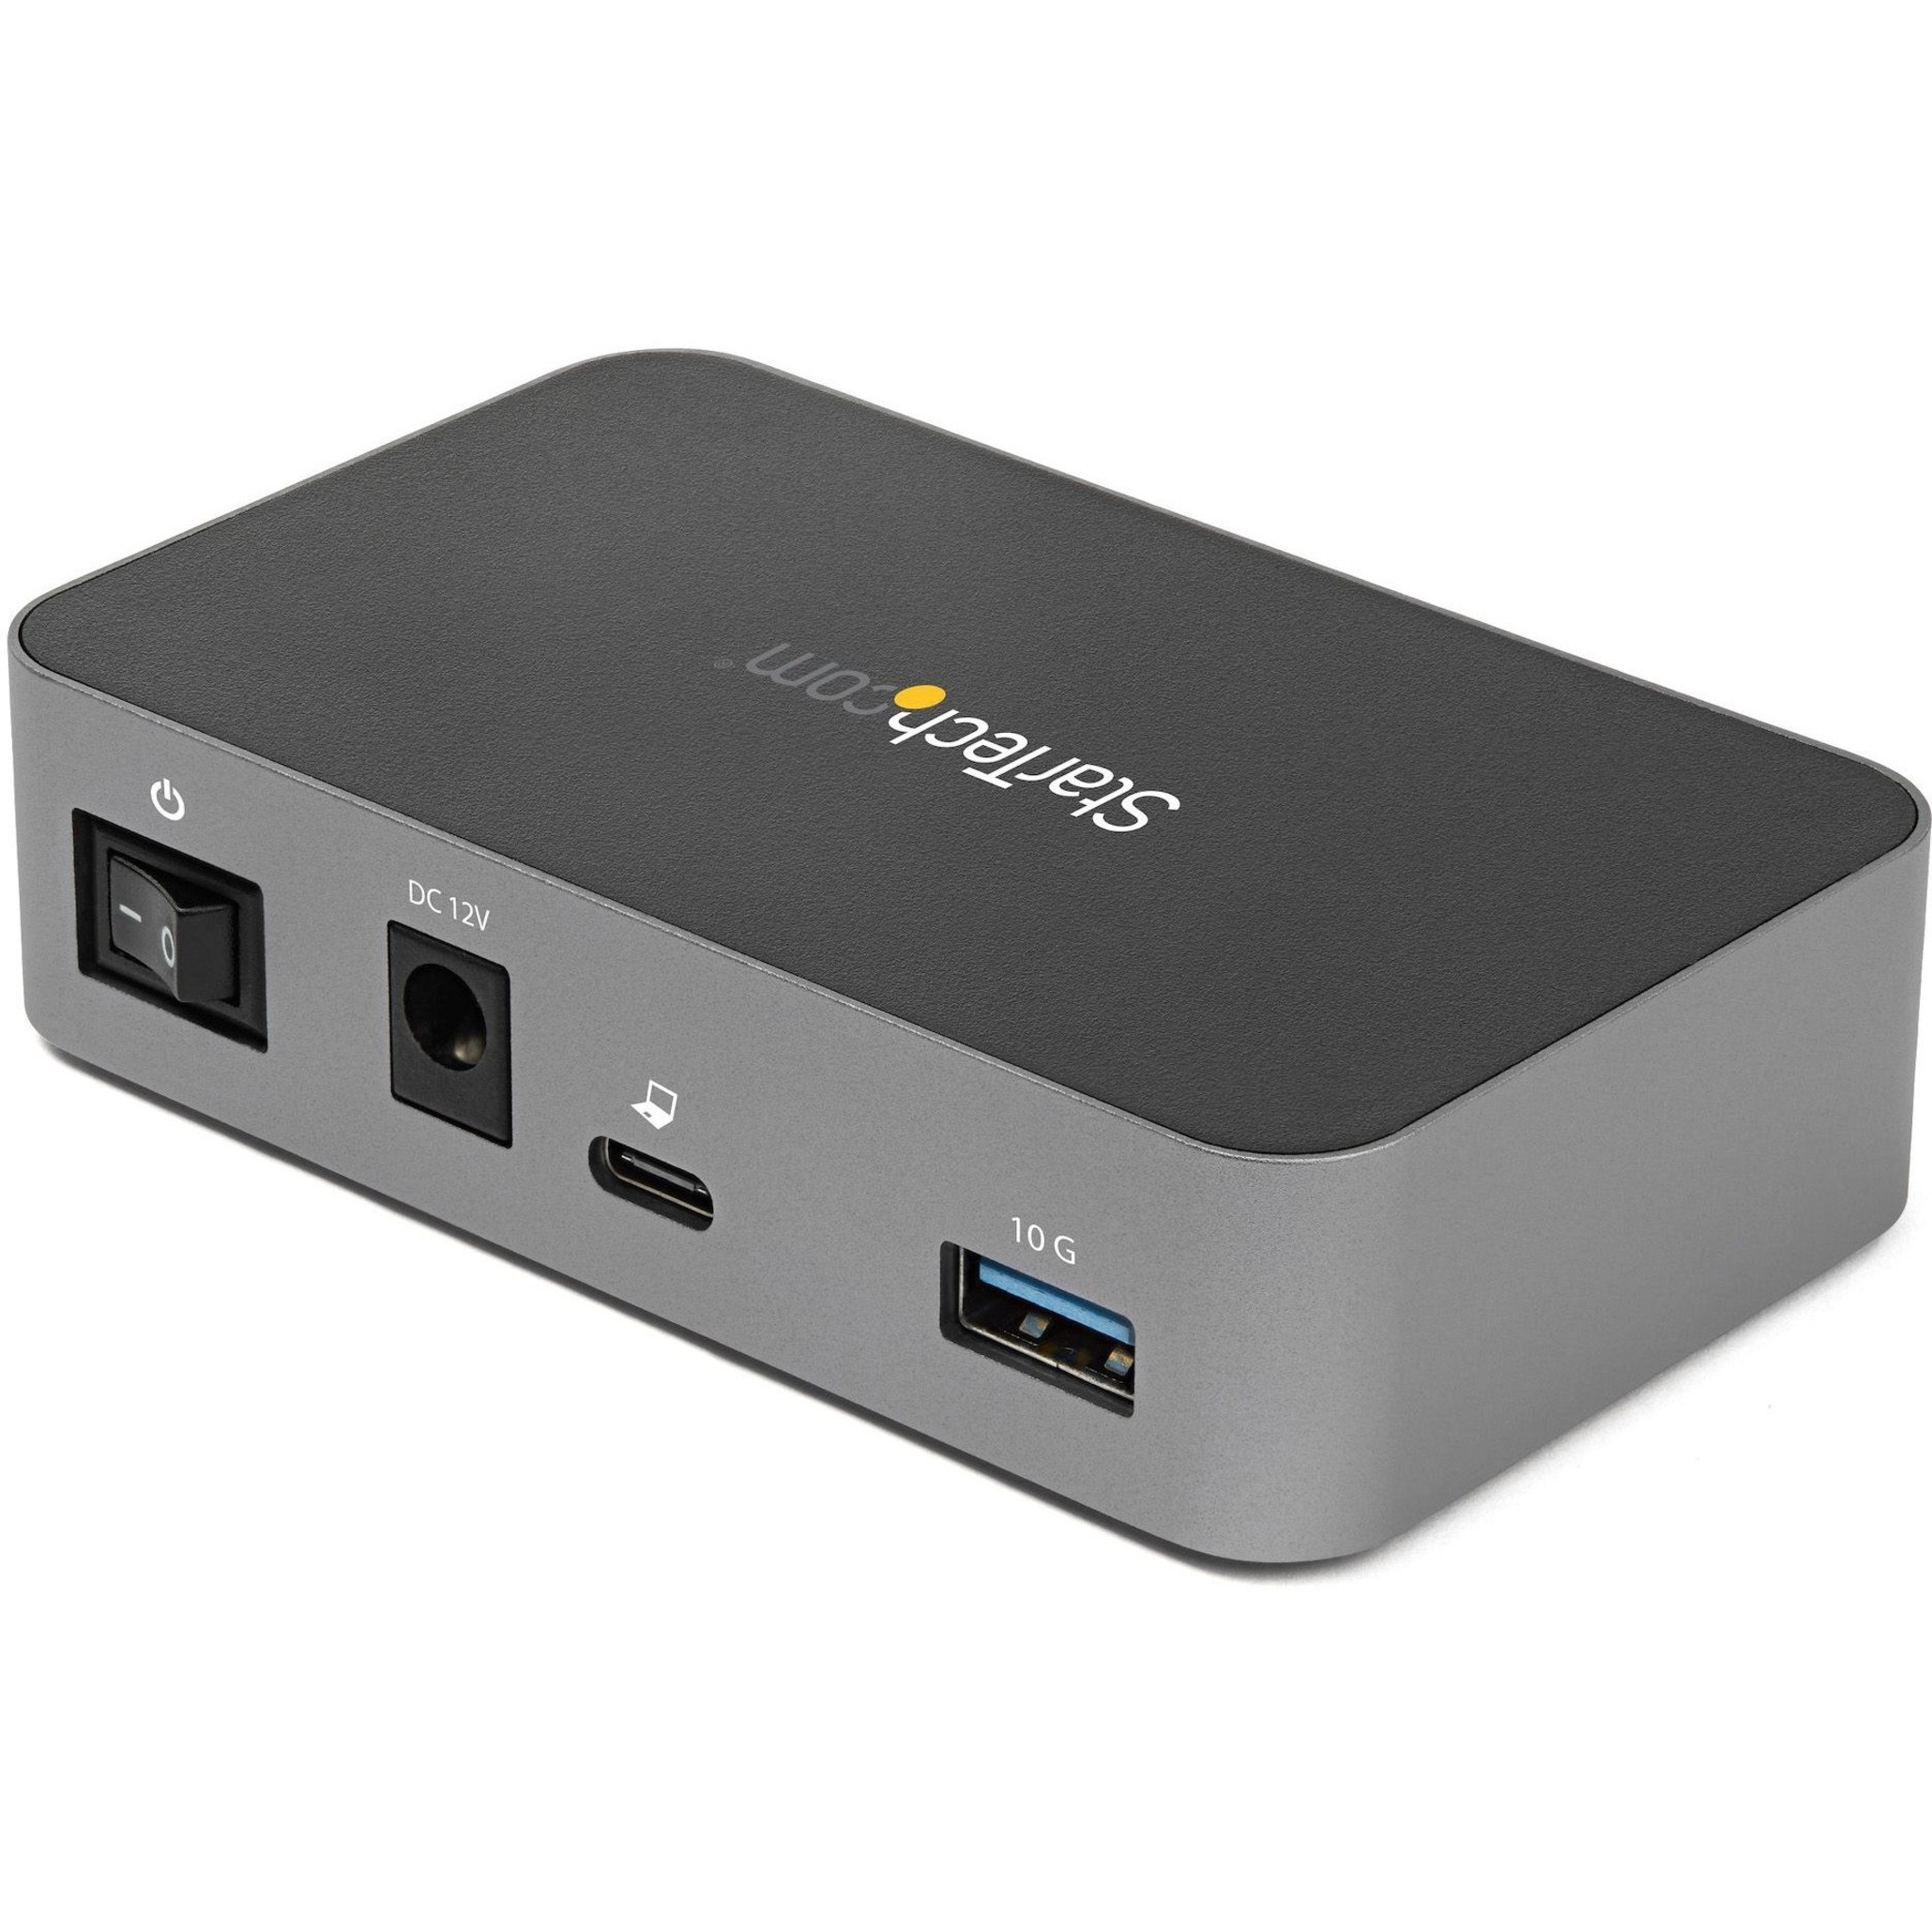 Startech .com 4 Port USB C with Power Adapter, USB 3.1/3.2 Gen 2 (10Gbps), 4x USB Type A, Self Powered, Fast Charge Port, Mountable4-Port... HB31C4AS - Corporate Armor